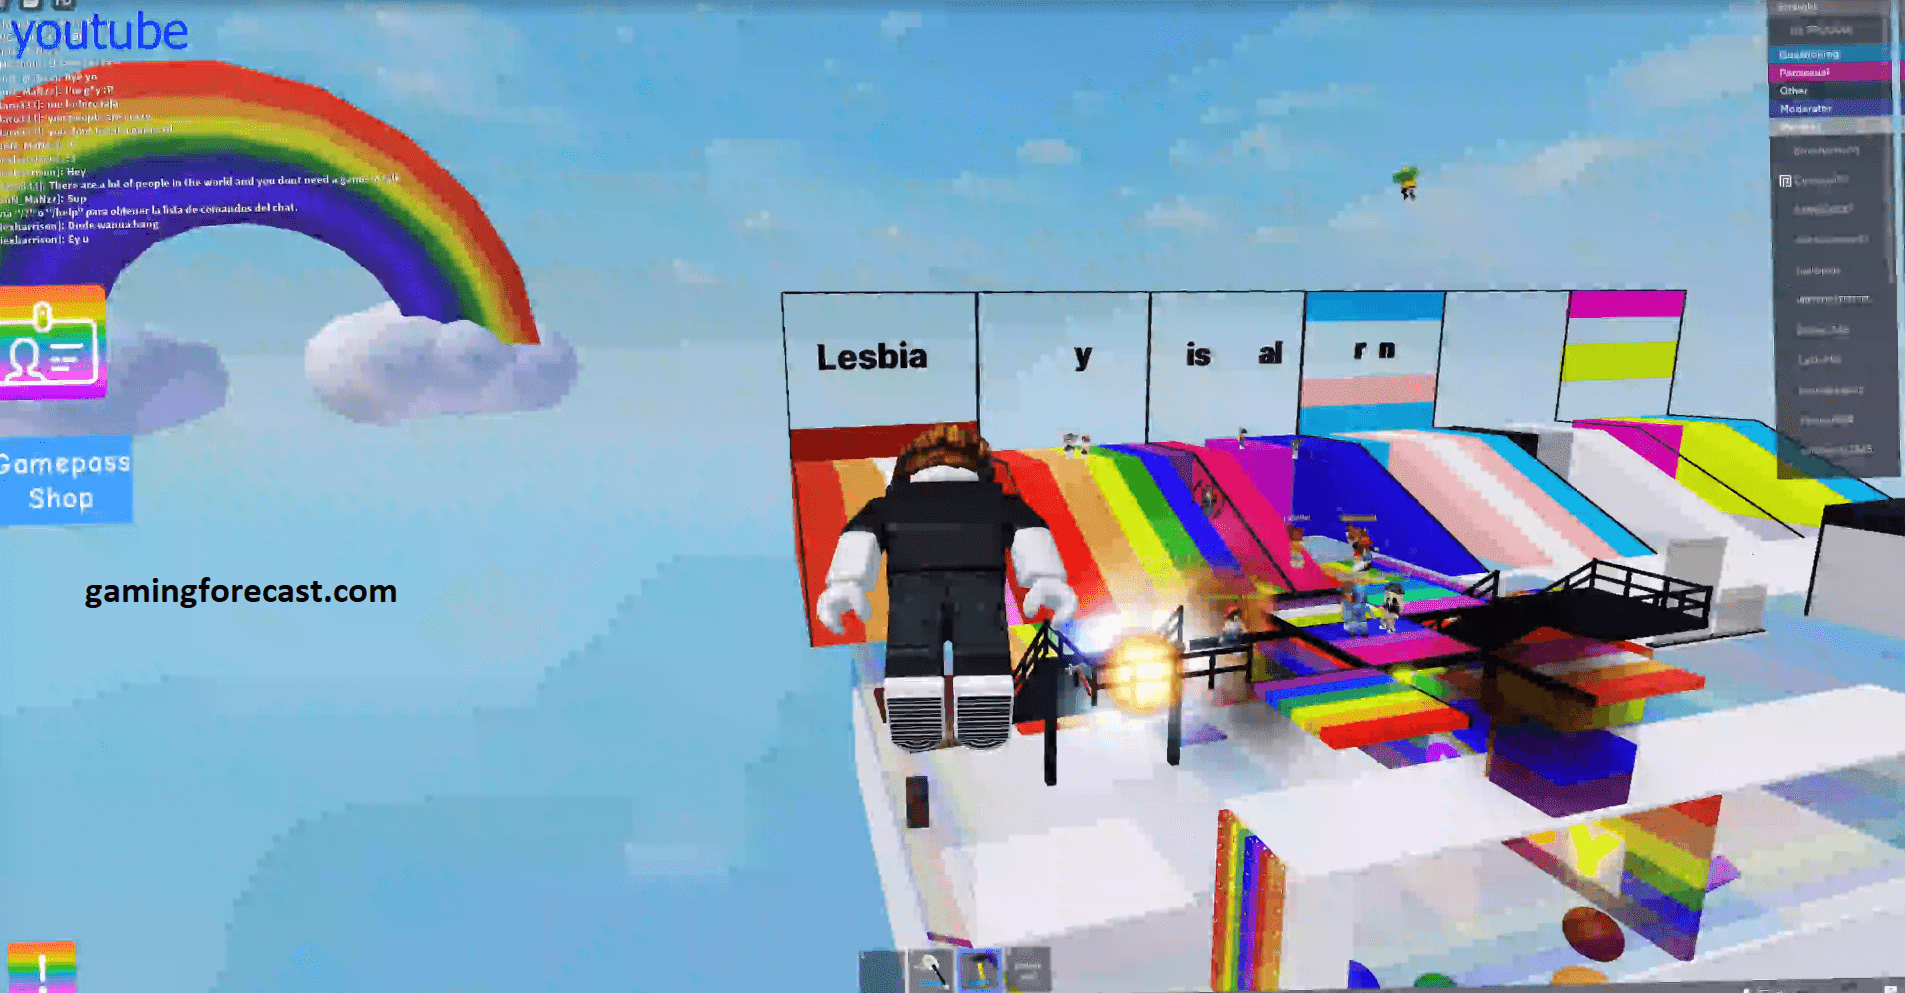 Roblox Hack Download Pc Destroy Lobby Fly Aimbot Scripts 2021 Gaming Forecast Download Free Online Game Hacks - roblox jailbreak hack mobile